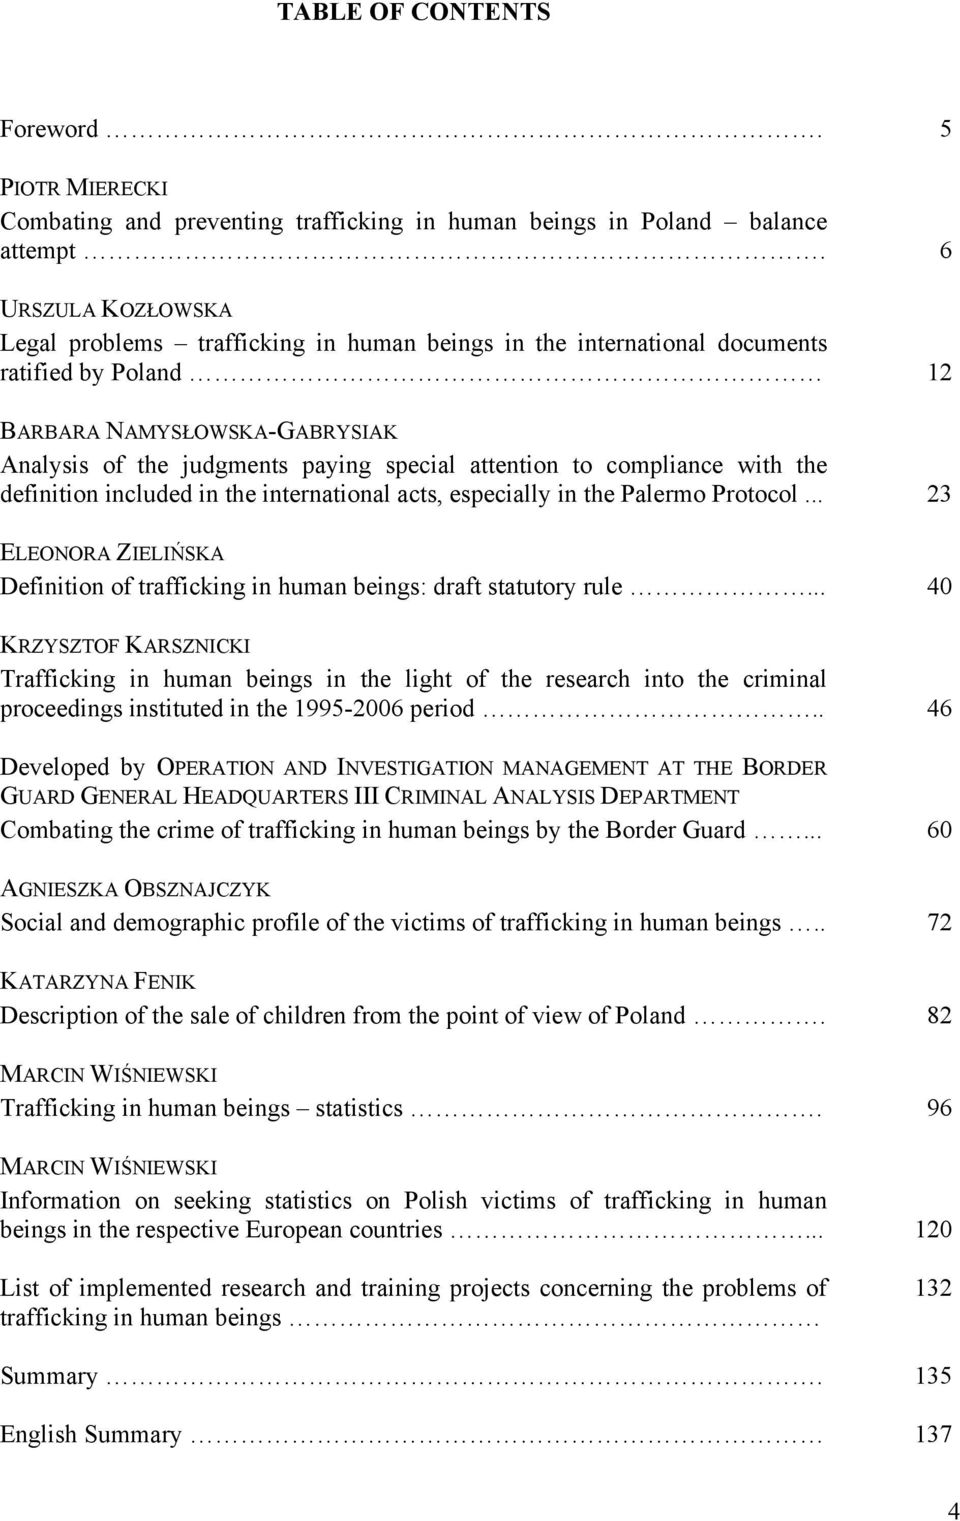 compliance with the definition included in the international acts, especially in the Palermo Protocol... 23 ELEONORA ZIELIŃSKA Definition of trafficking in human beings: draft statutory rule.